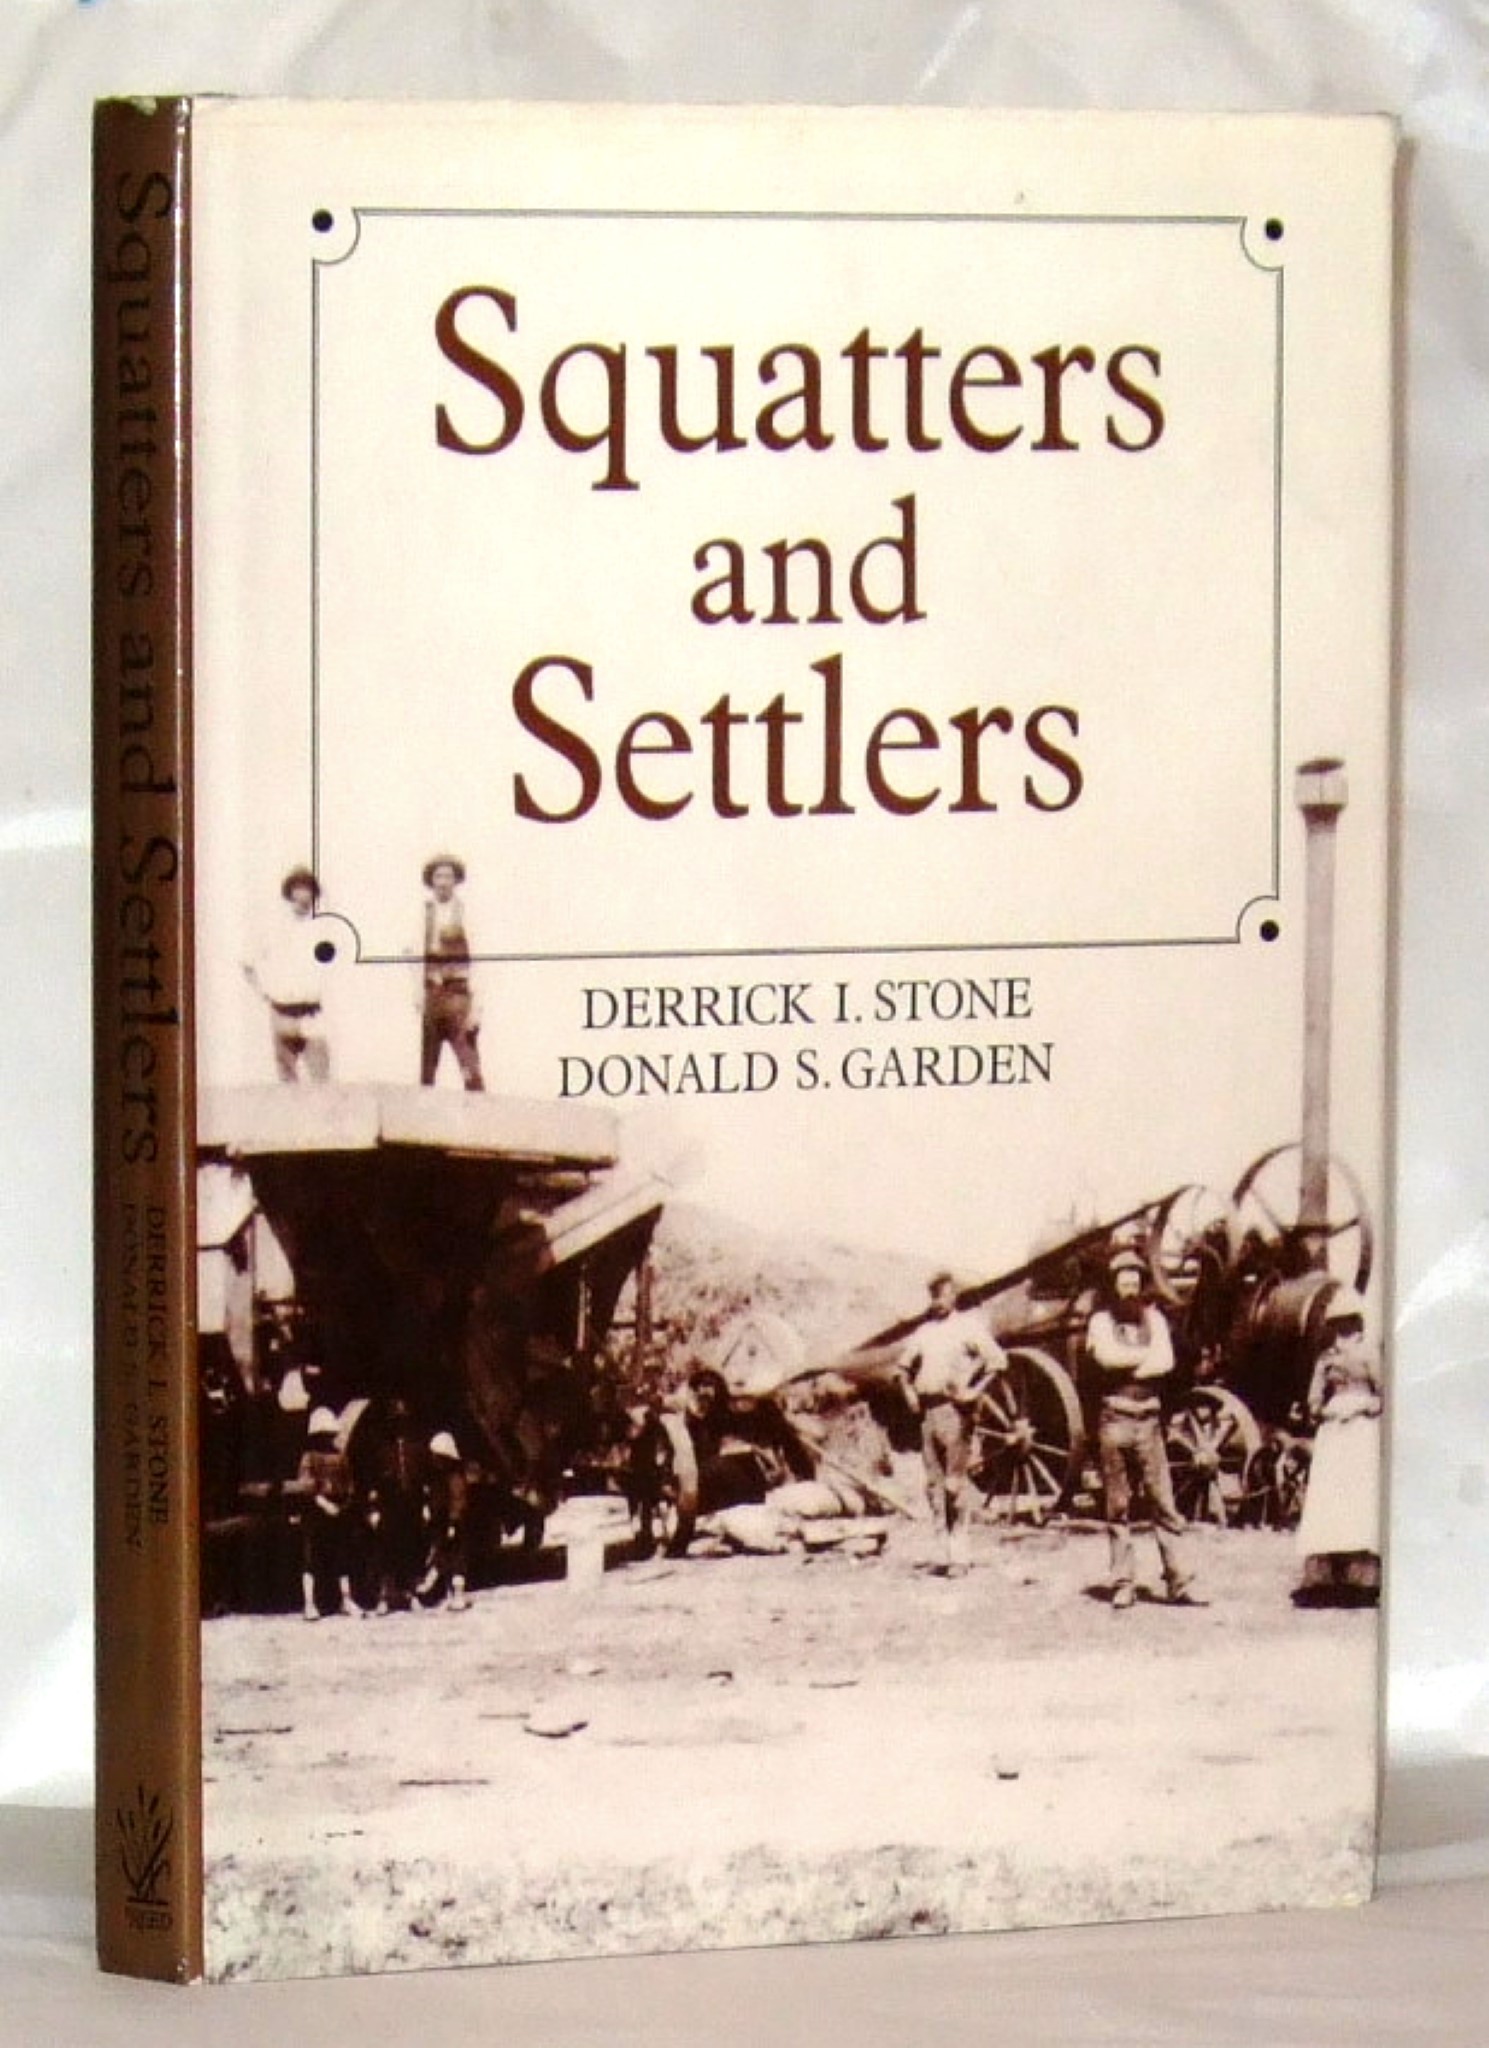 Squatters and Settlers - Derrick I. Stone; Donald S. Garden